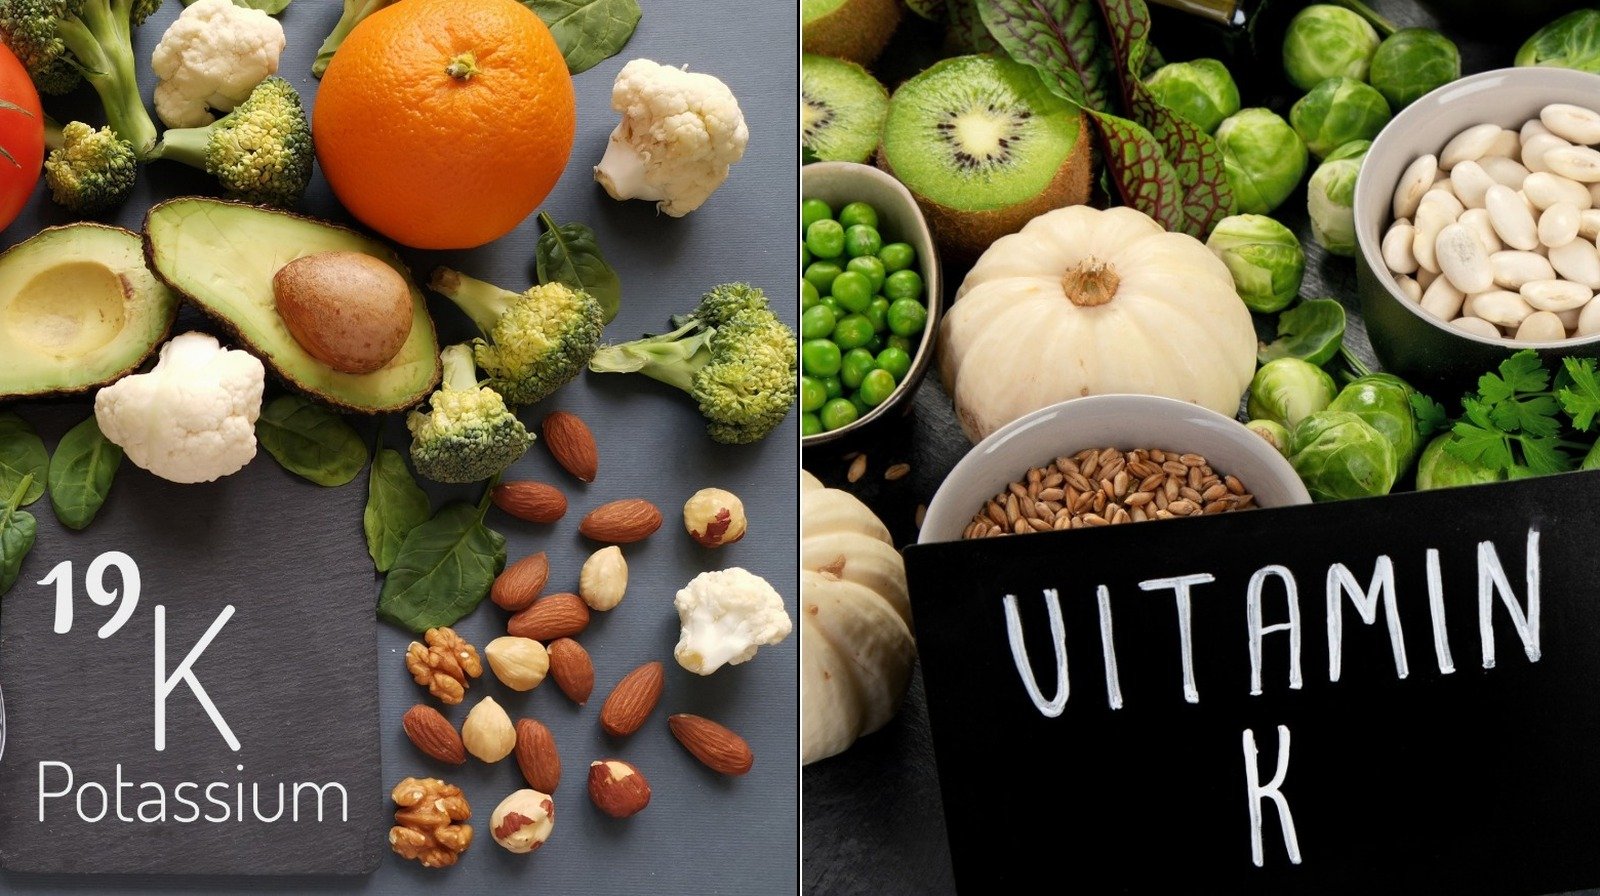 Are Vitamin K And Potassium The Same Thing? - Health Digest